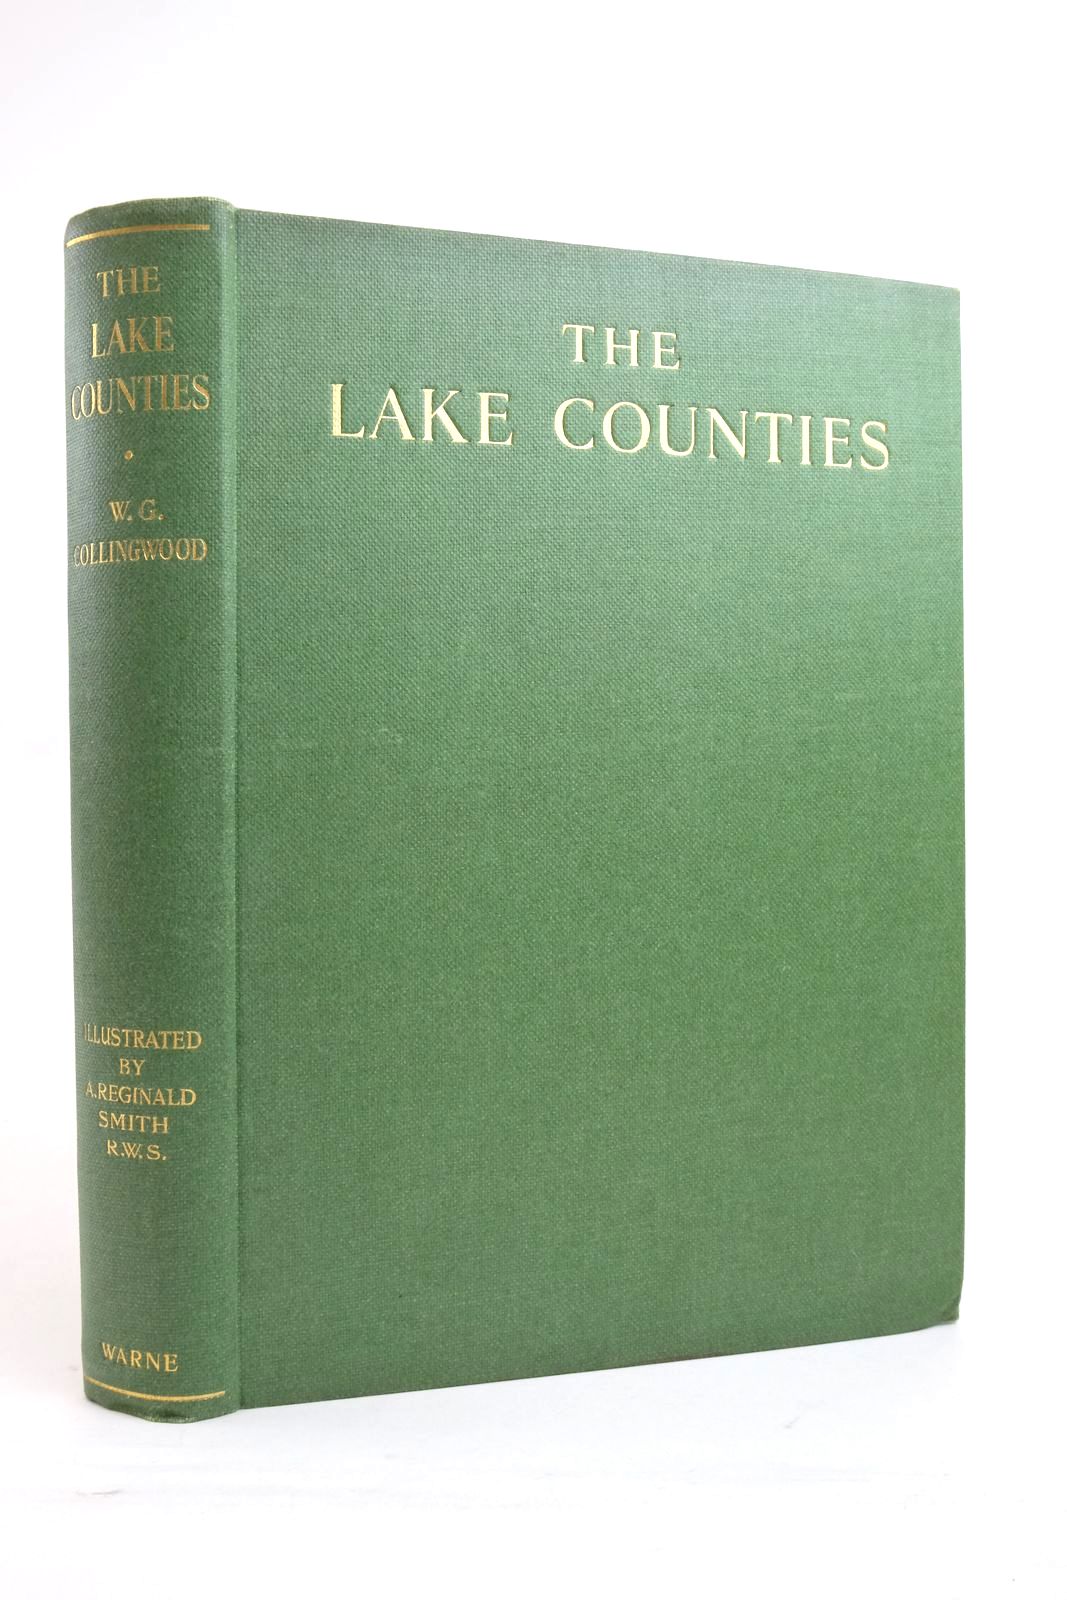 Photo of THE LAKE COUNTIES written by Collingwood, W.G. illustrated by Smith, A. Reginald published by Frederick Warne &amp; Co Ltd. (STOCK CODE: 2136433)  for sale by Stella & Rose's Books